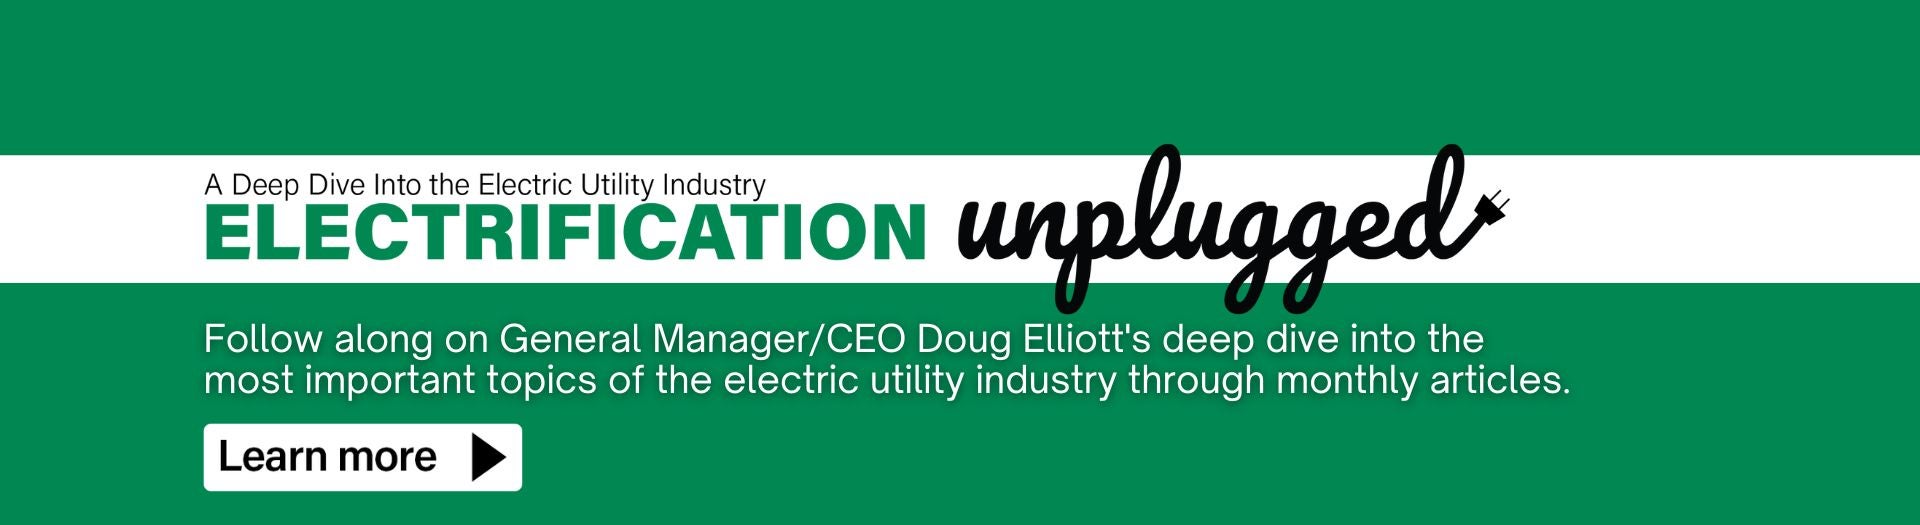 A deep dive into the electric industry: Electrification Unplugged. Follow along on General Manager/CEO Doug Elliott's deep dive into the most important topics of the electric utility industry through monthly articles. 